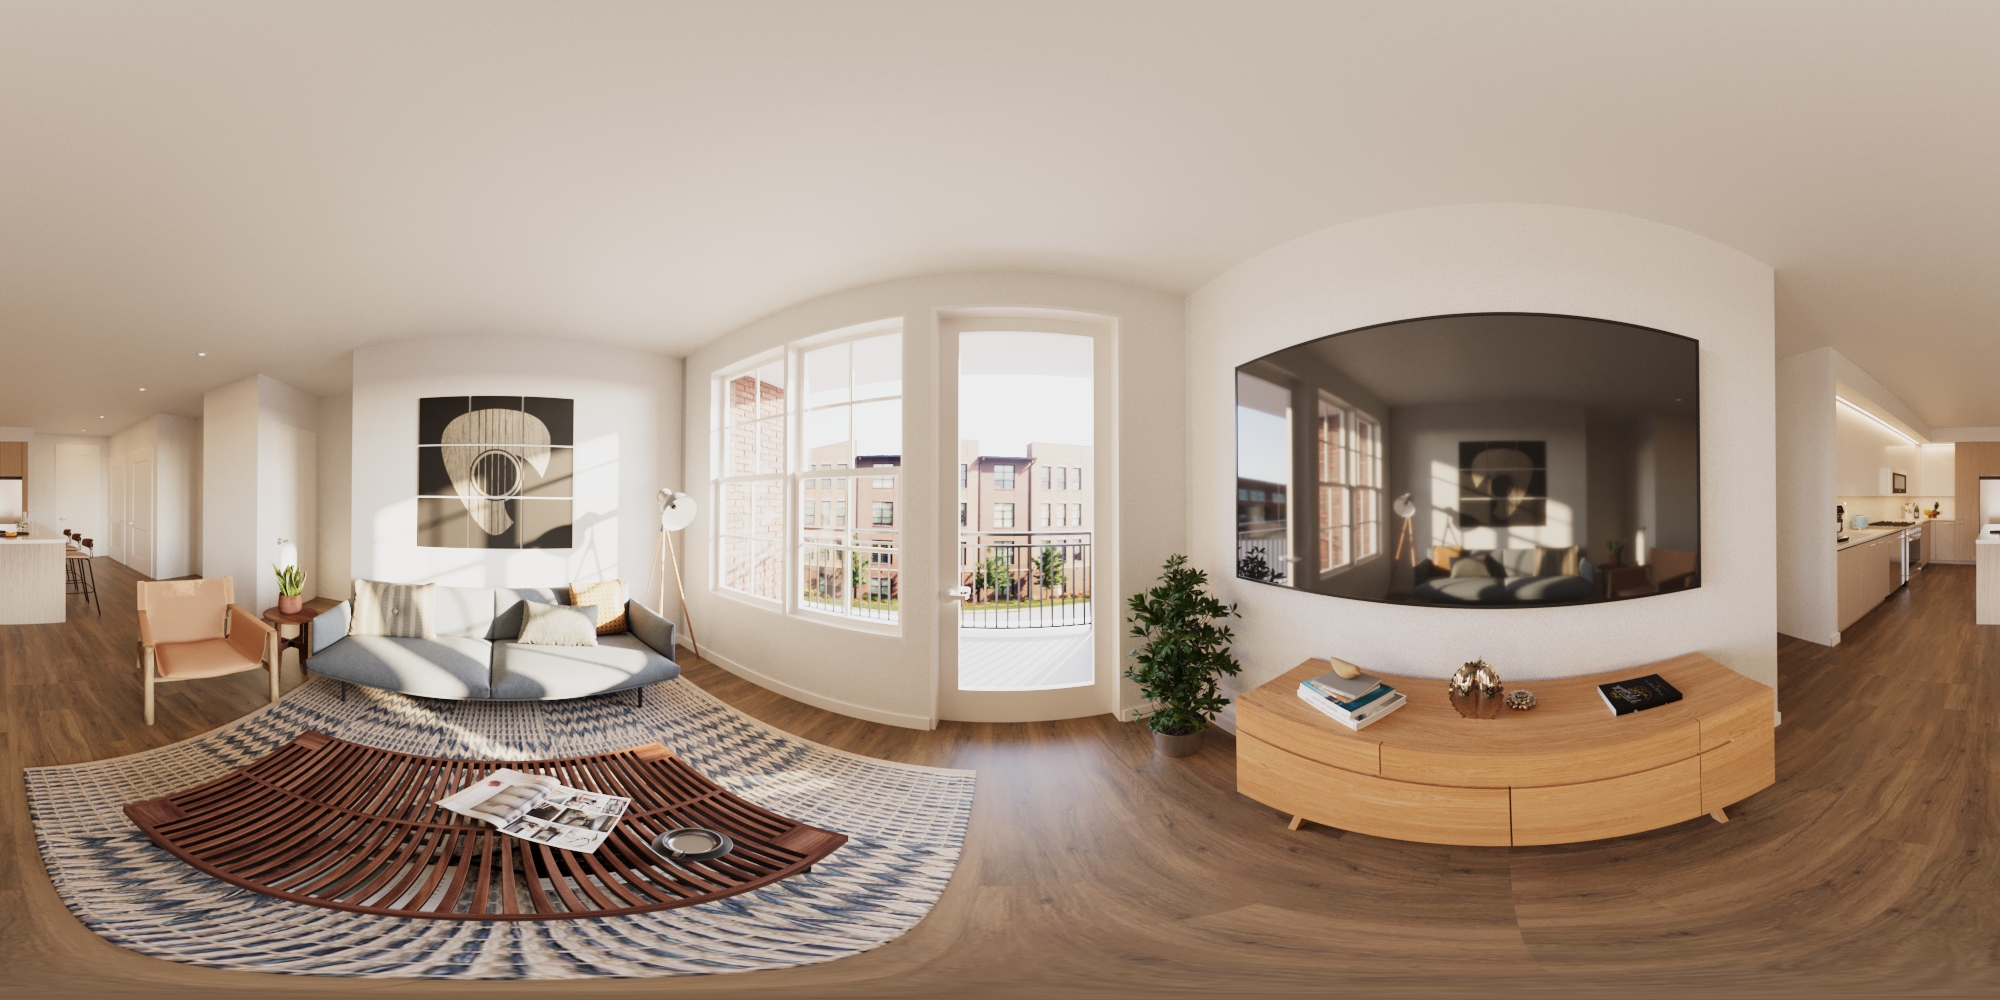 Panoramic views spanning from left to right showing a kitchen, living room, balcony and television area.